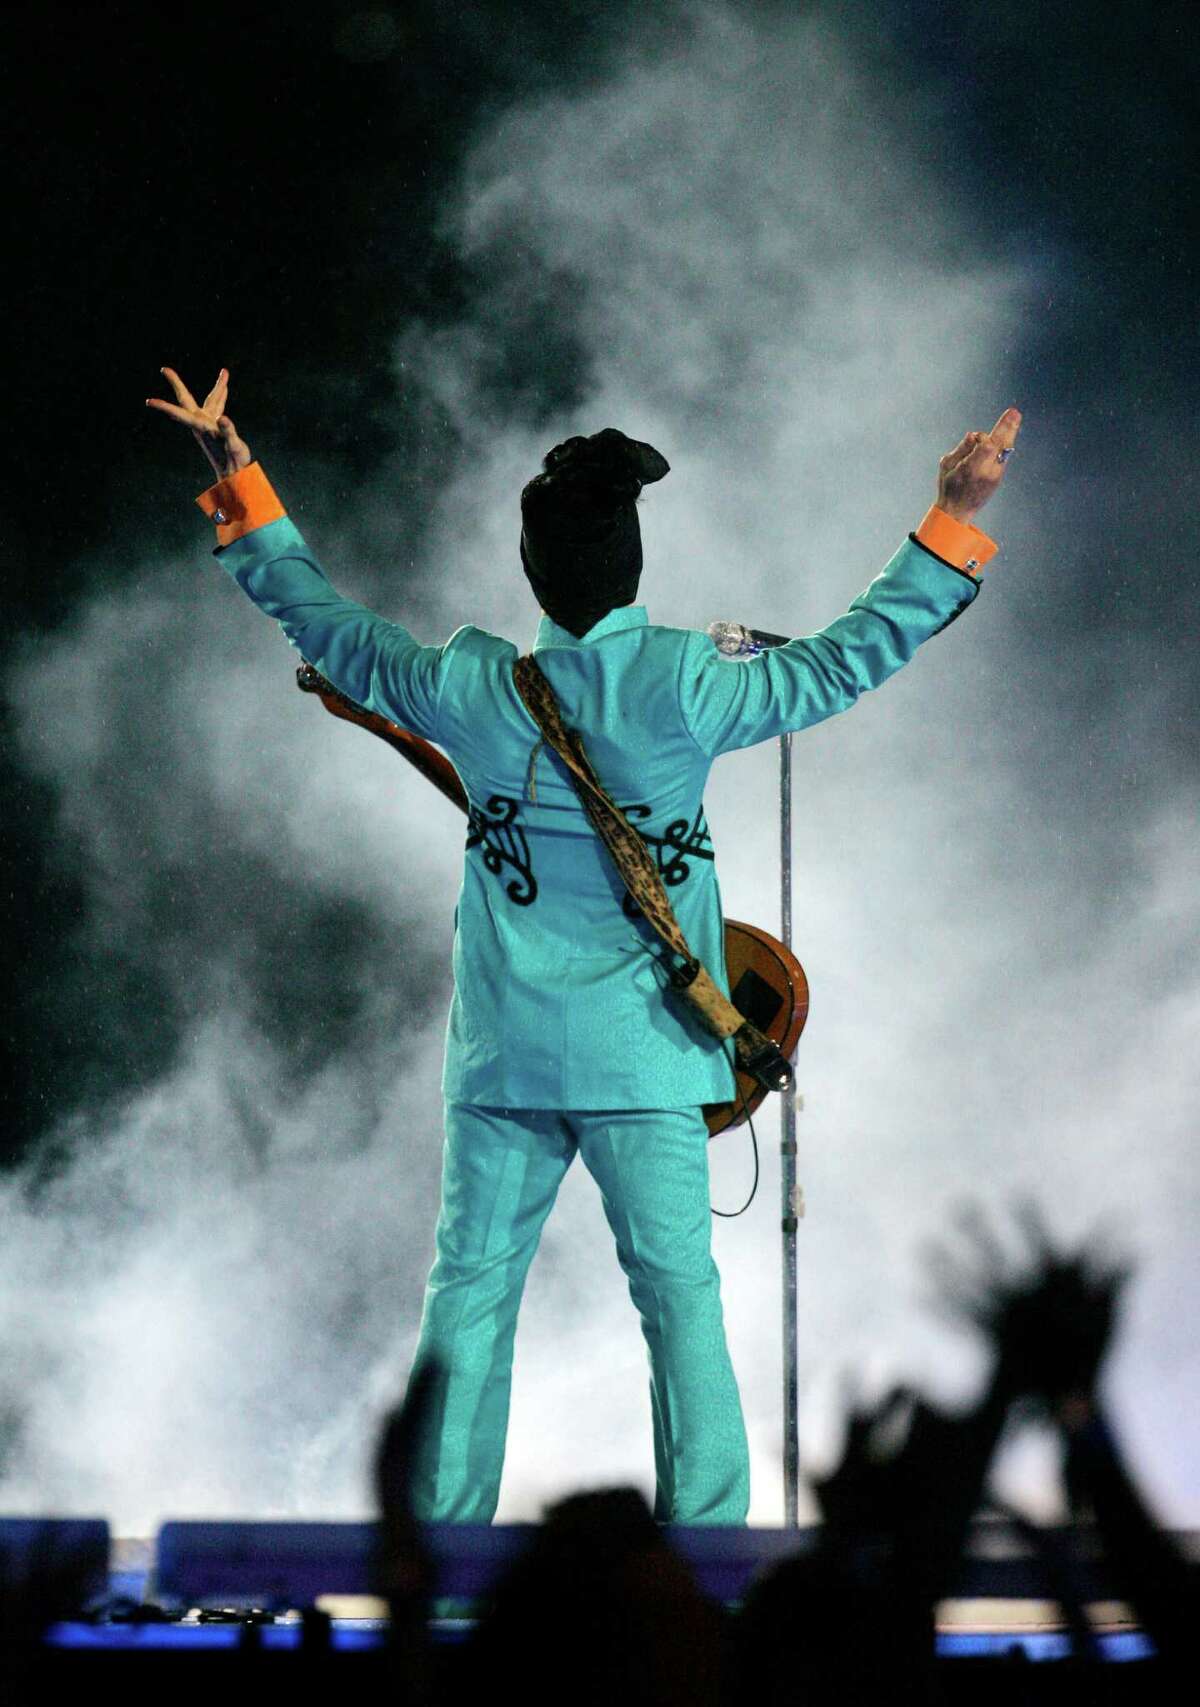 FILE - In this Feb. 4, 2007 file photo, Prince performs during the halftime show at Super Bowl XLI at Dolphin Stadium in Miami. Prince's publicist has confirmed that Prince died at his home in Minnesota, Thursday, April 21, 2016. He was 57.